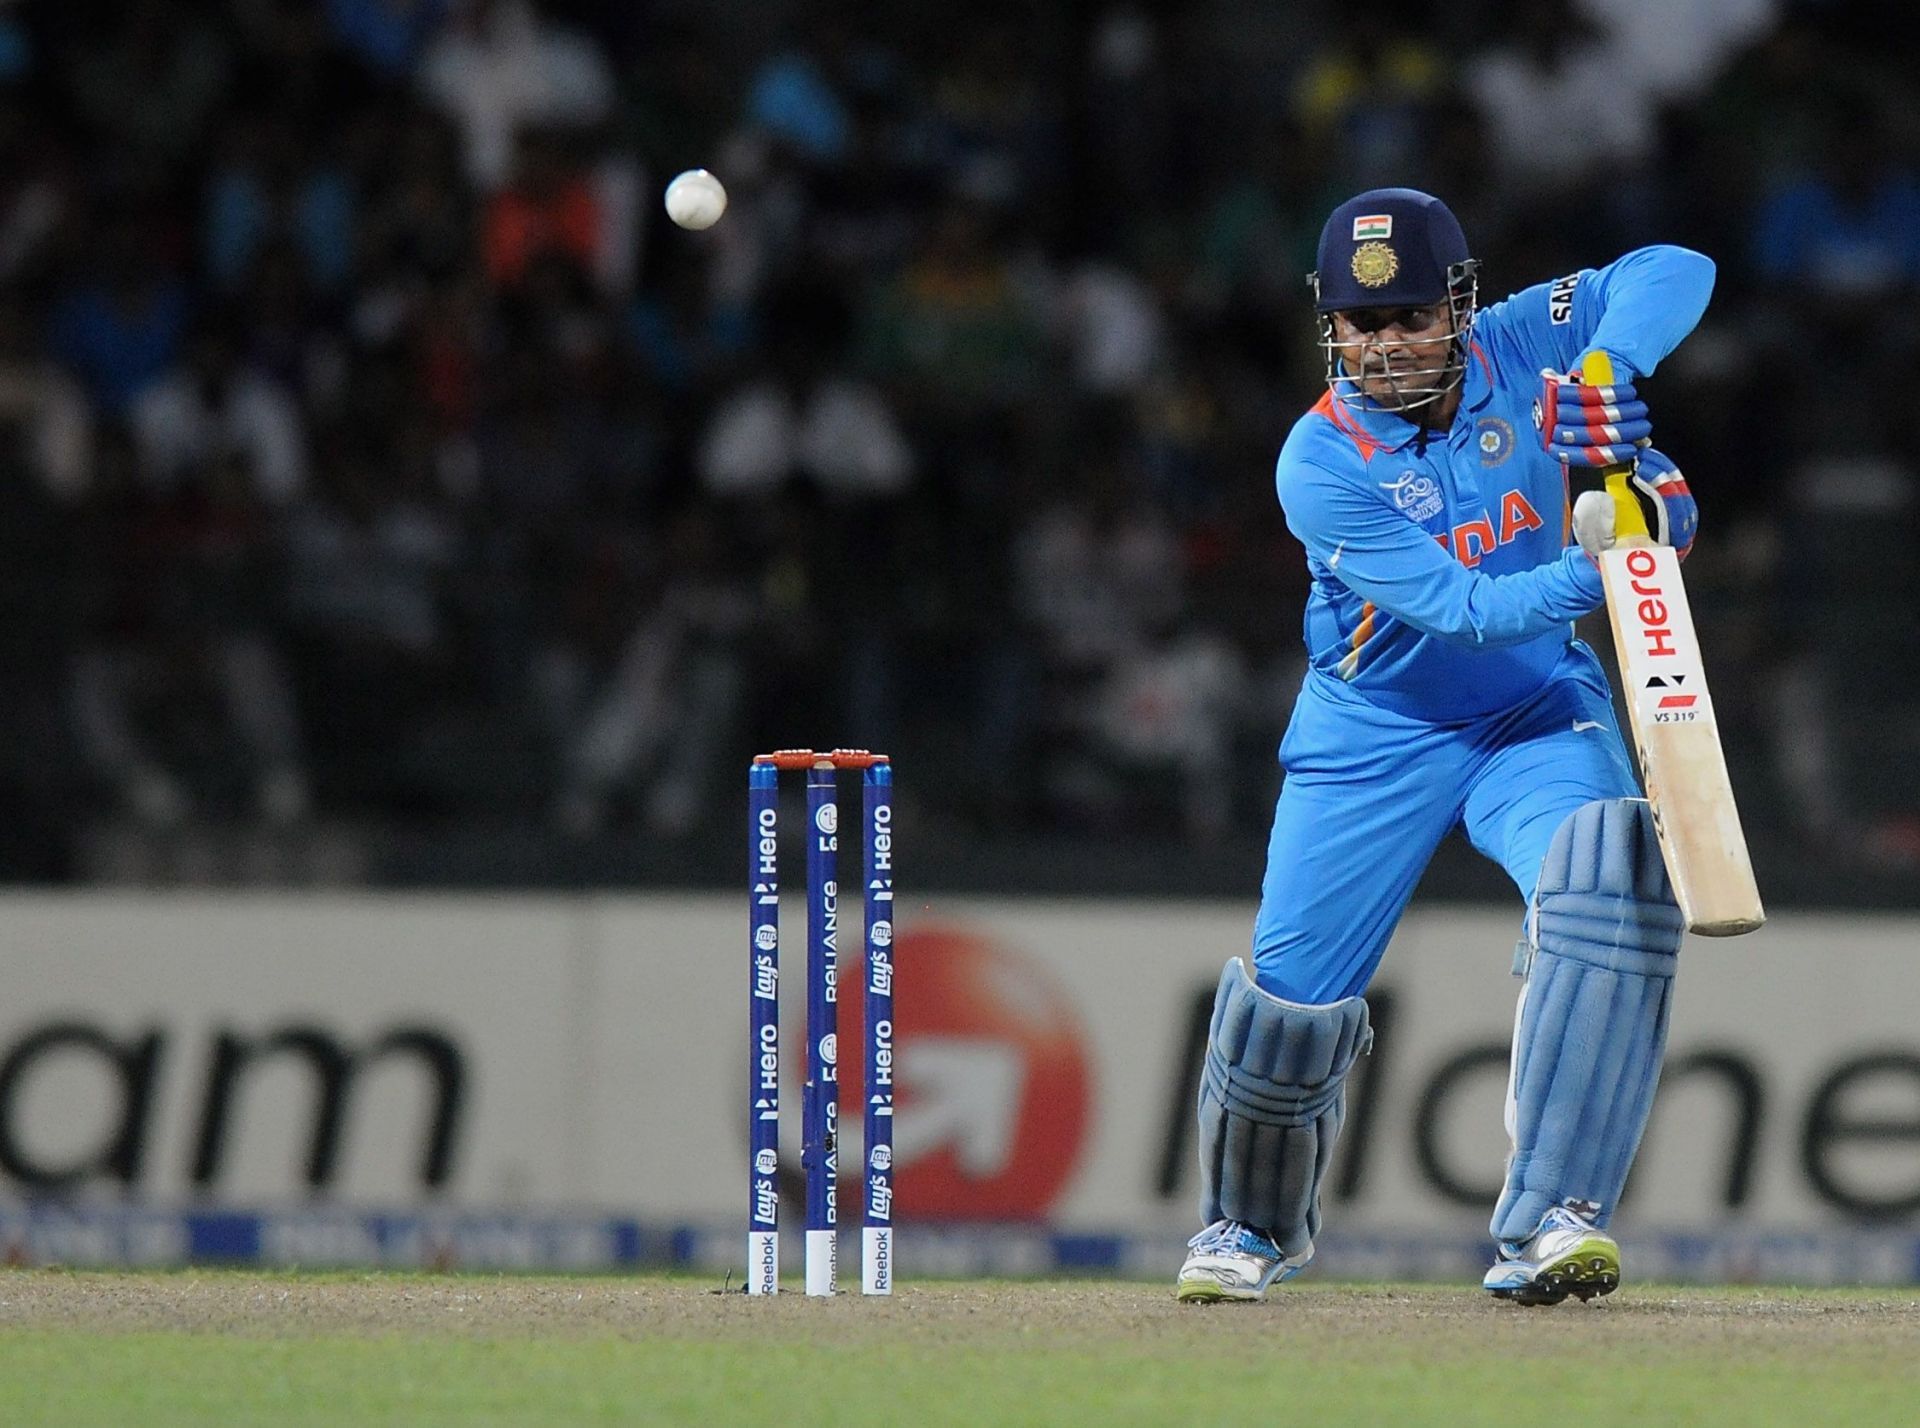 Virender Sehwag played his last T20I against South Africa